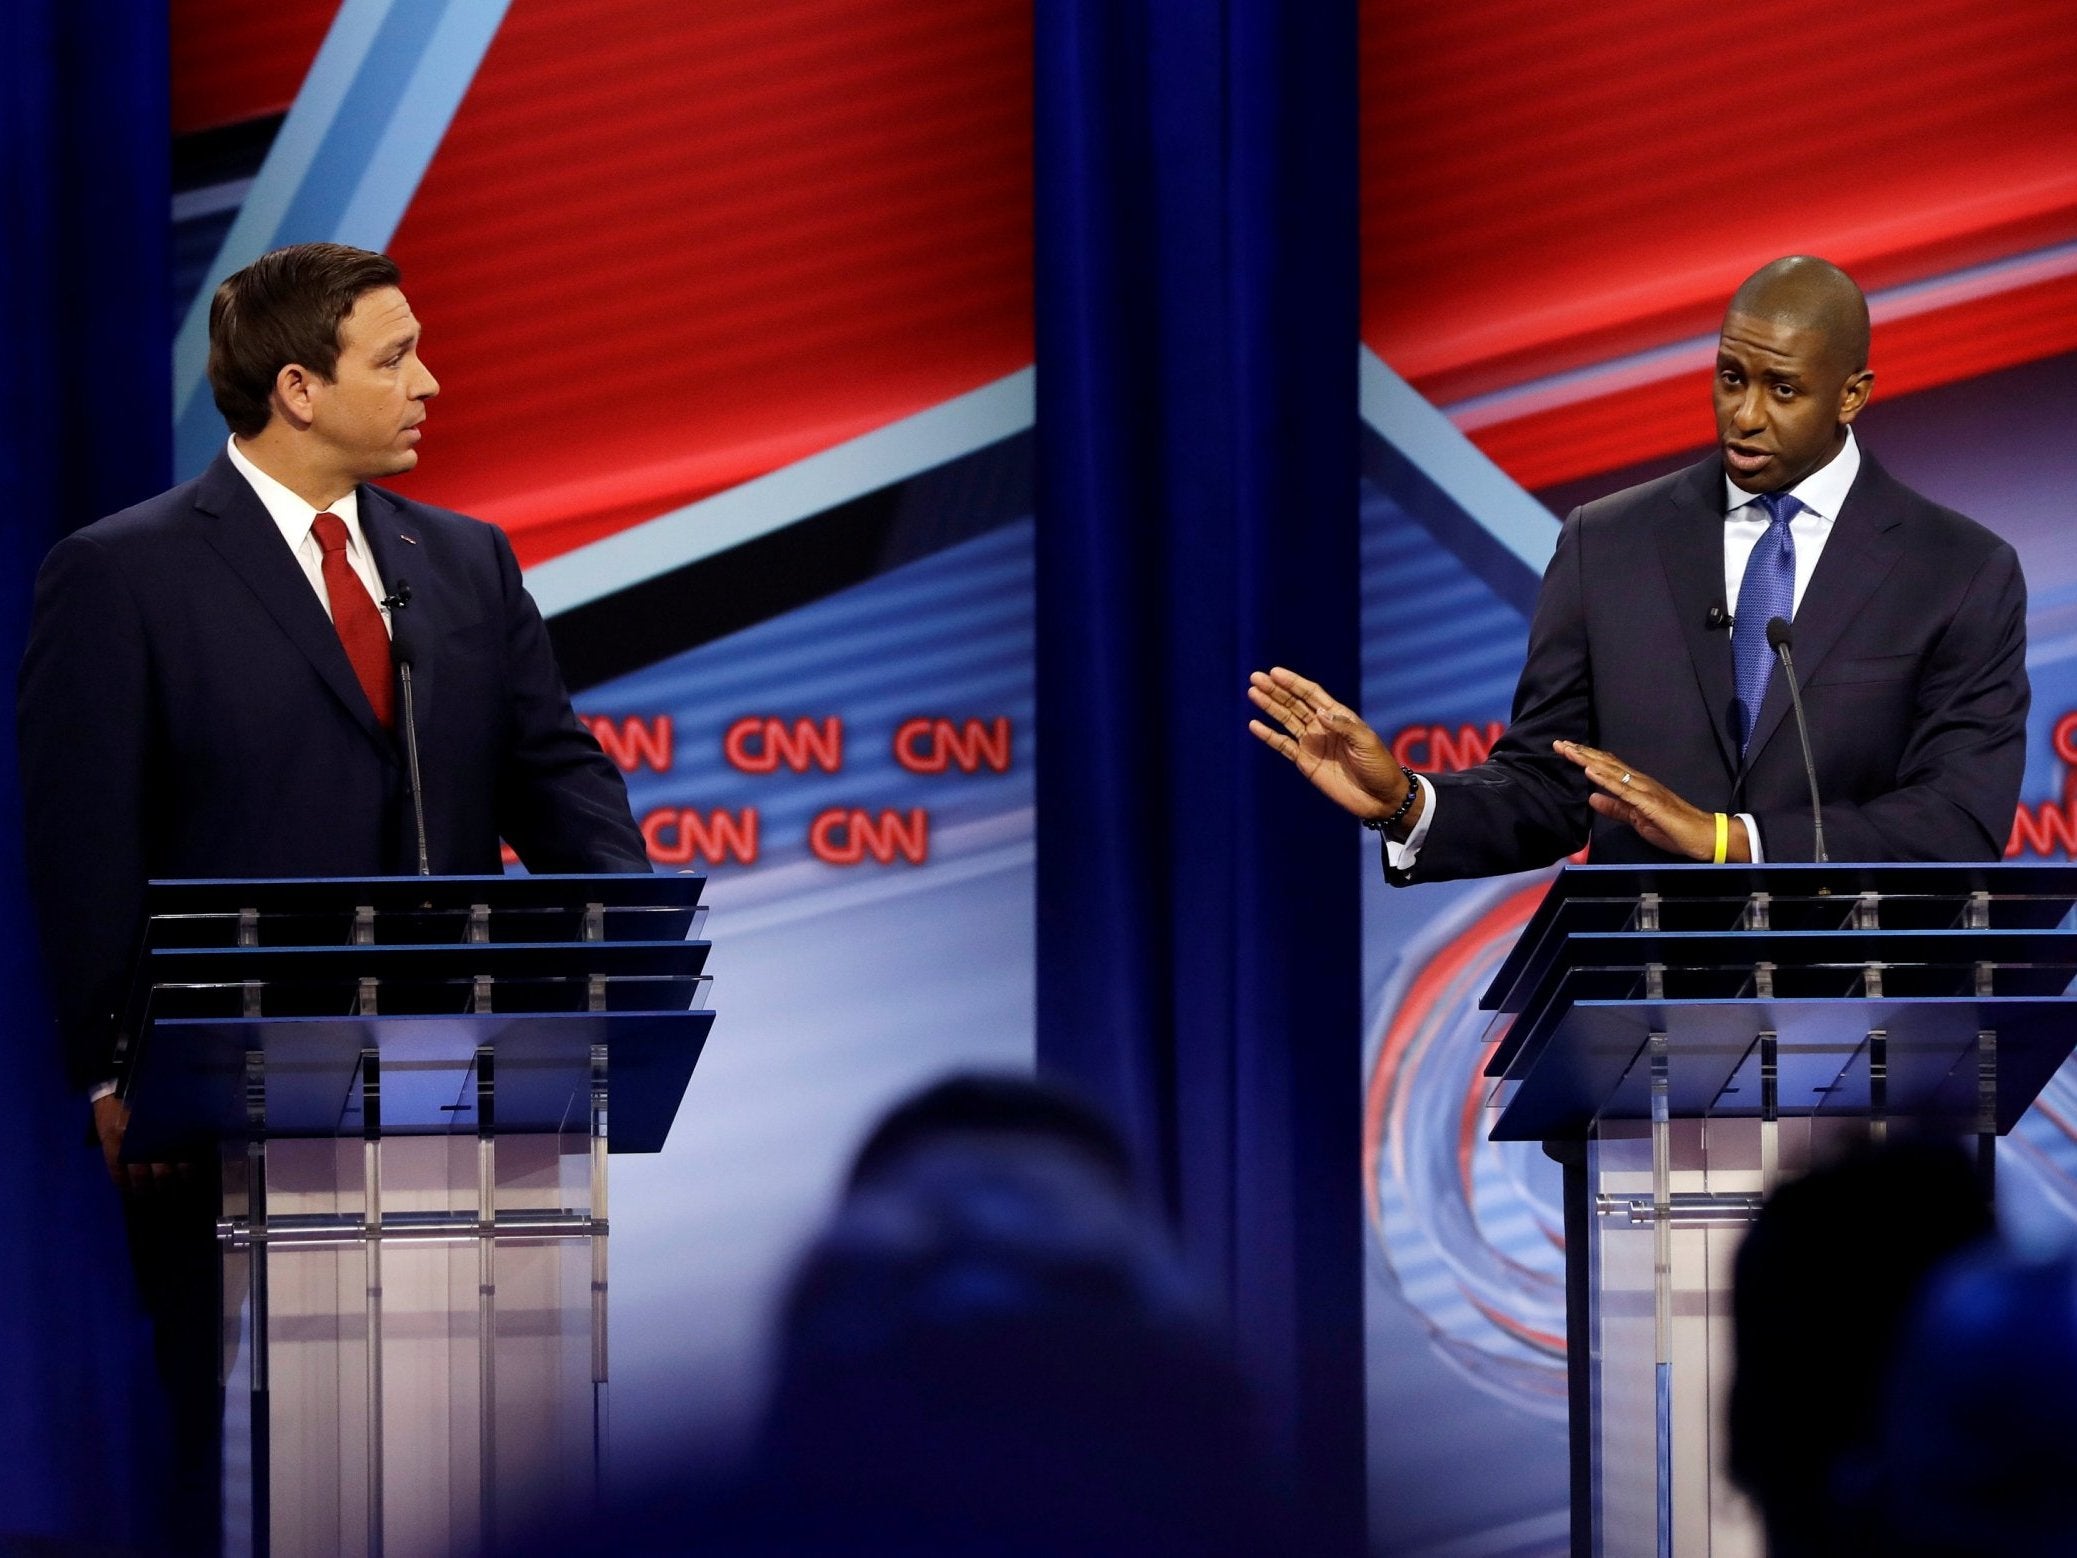 Ron DeSantis and Andrew Gillum lock horns in their first televised debate (Reuters)